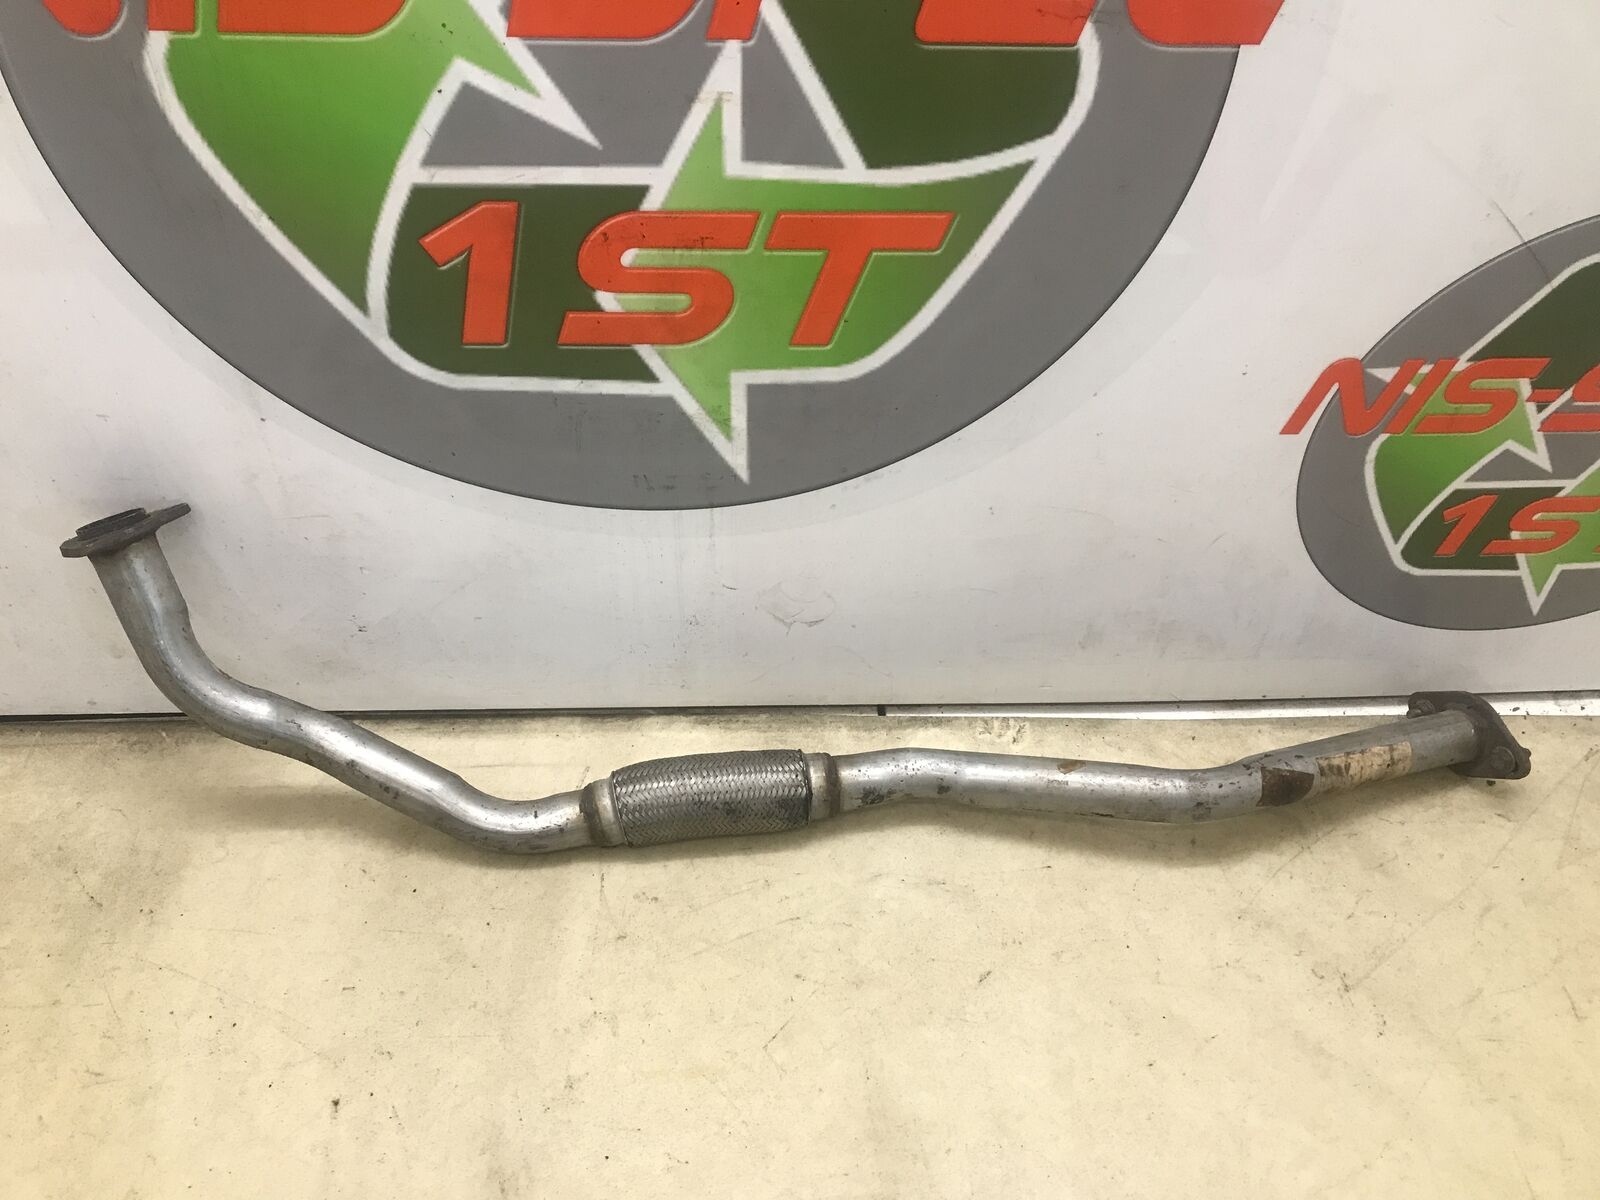 2001 Nissan Terrano 2.7l Exhaust front section with Flexi  200107F002 1999-2007